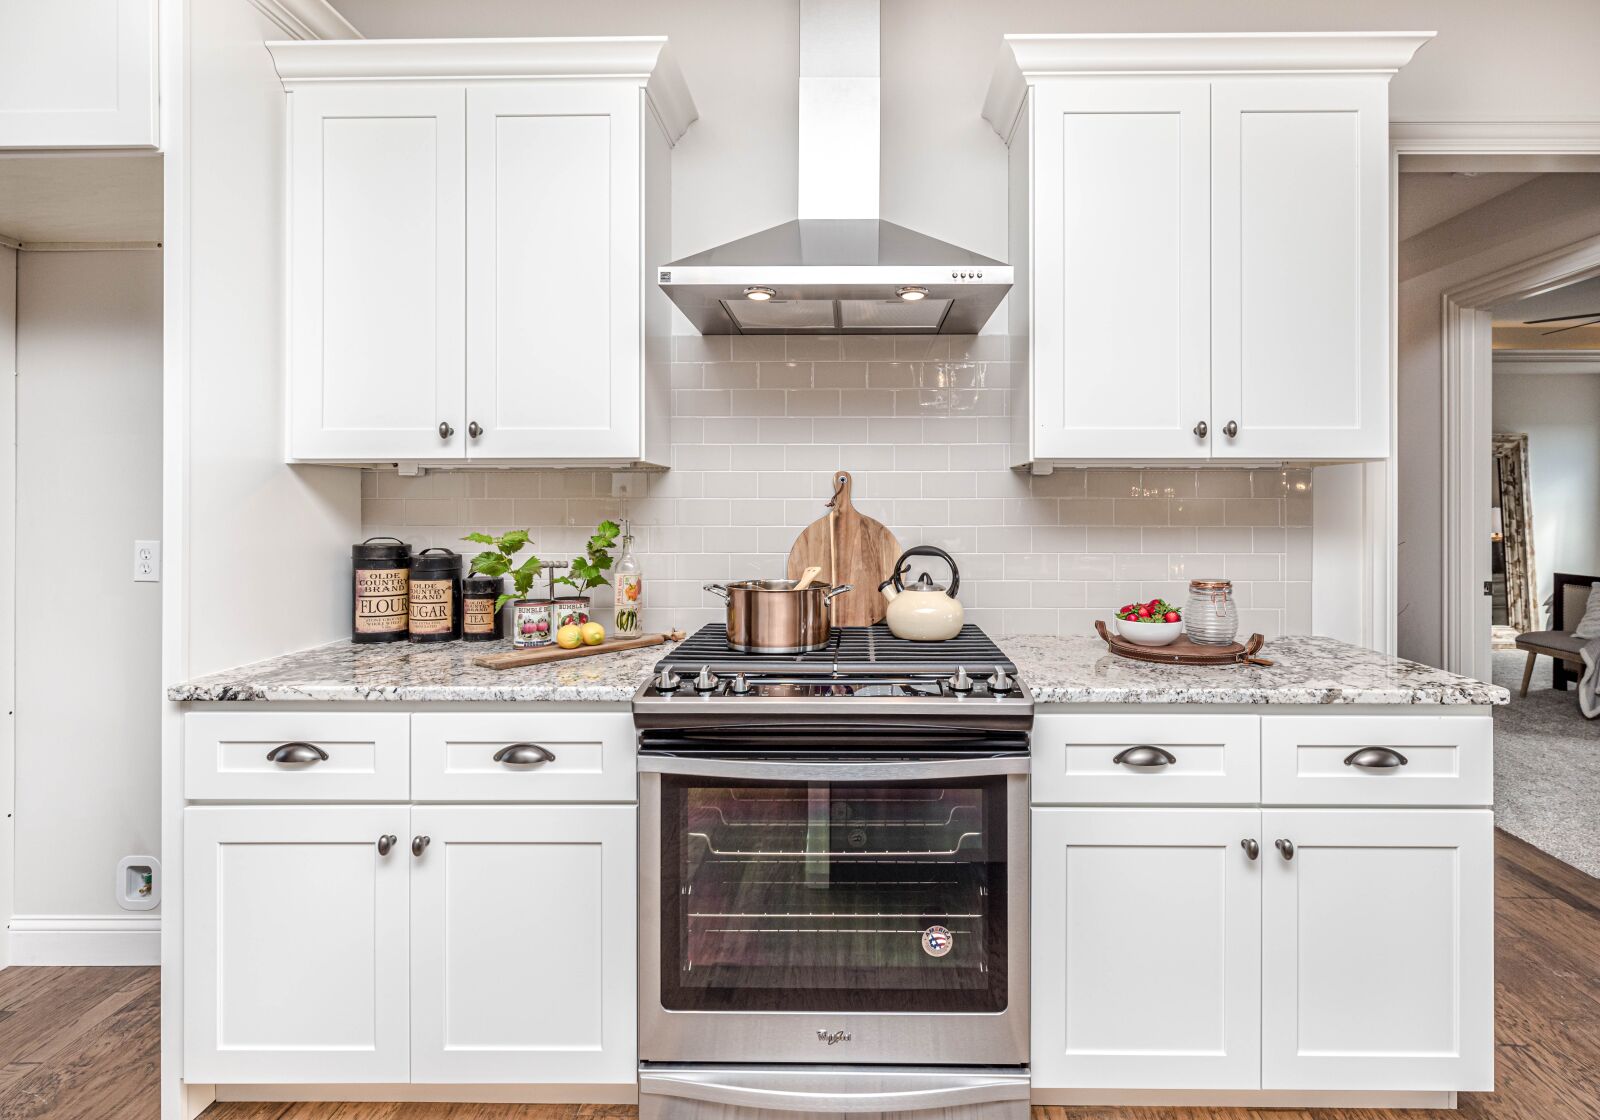 Nikon D810 sample photo. Kitchen, cabinets, oven photography